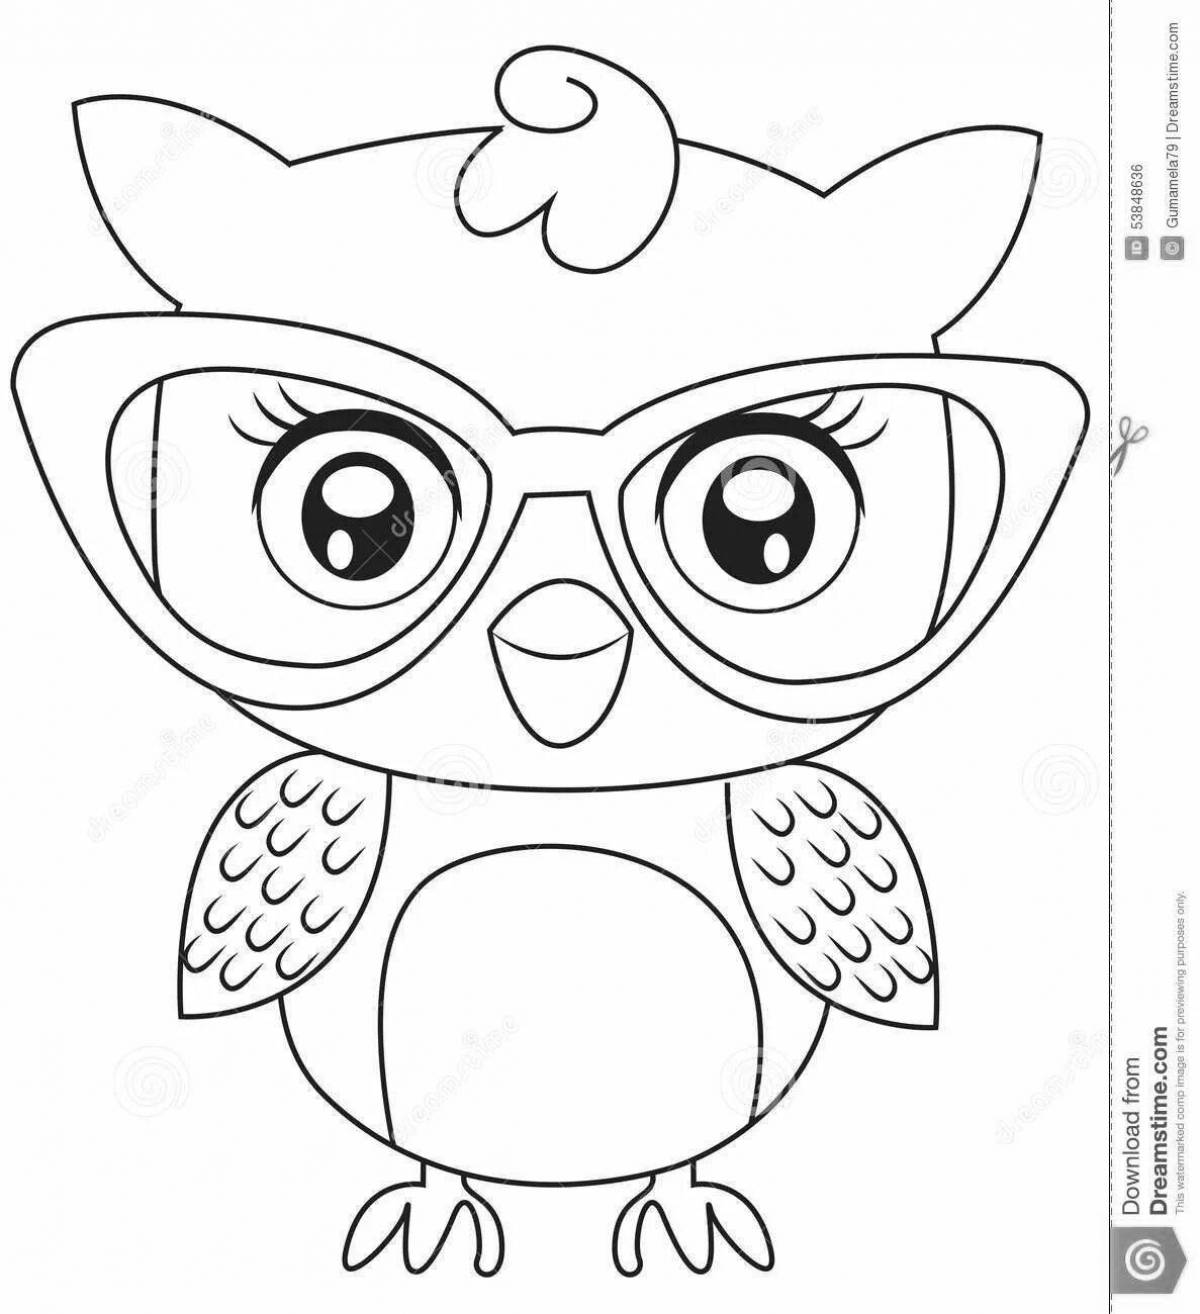 Lively cute owl coloring book